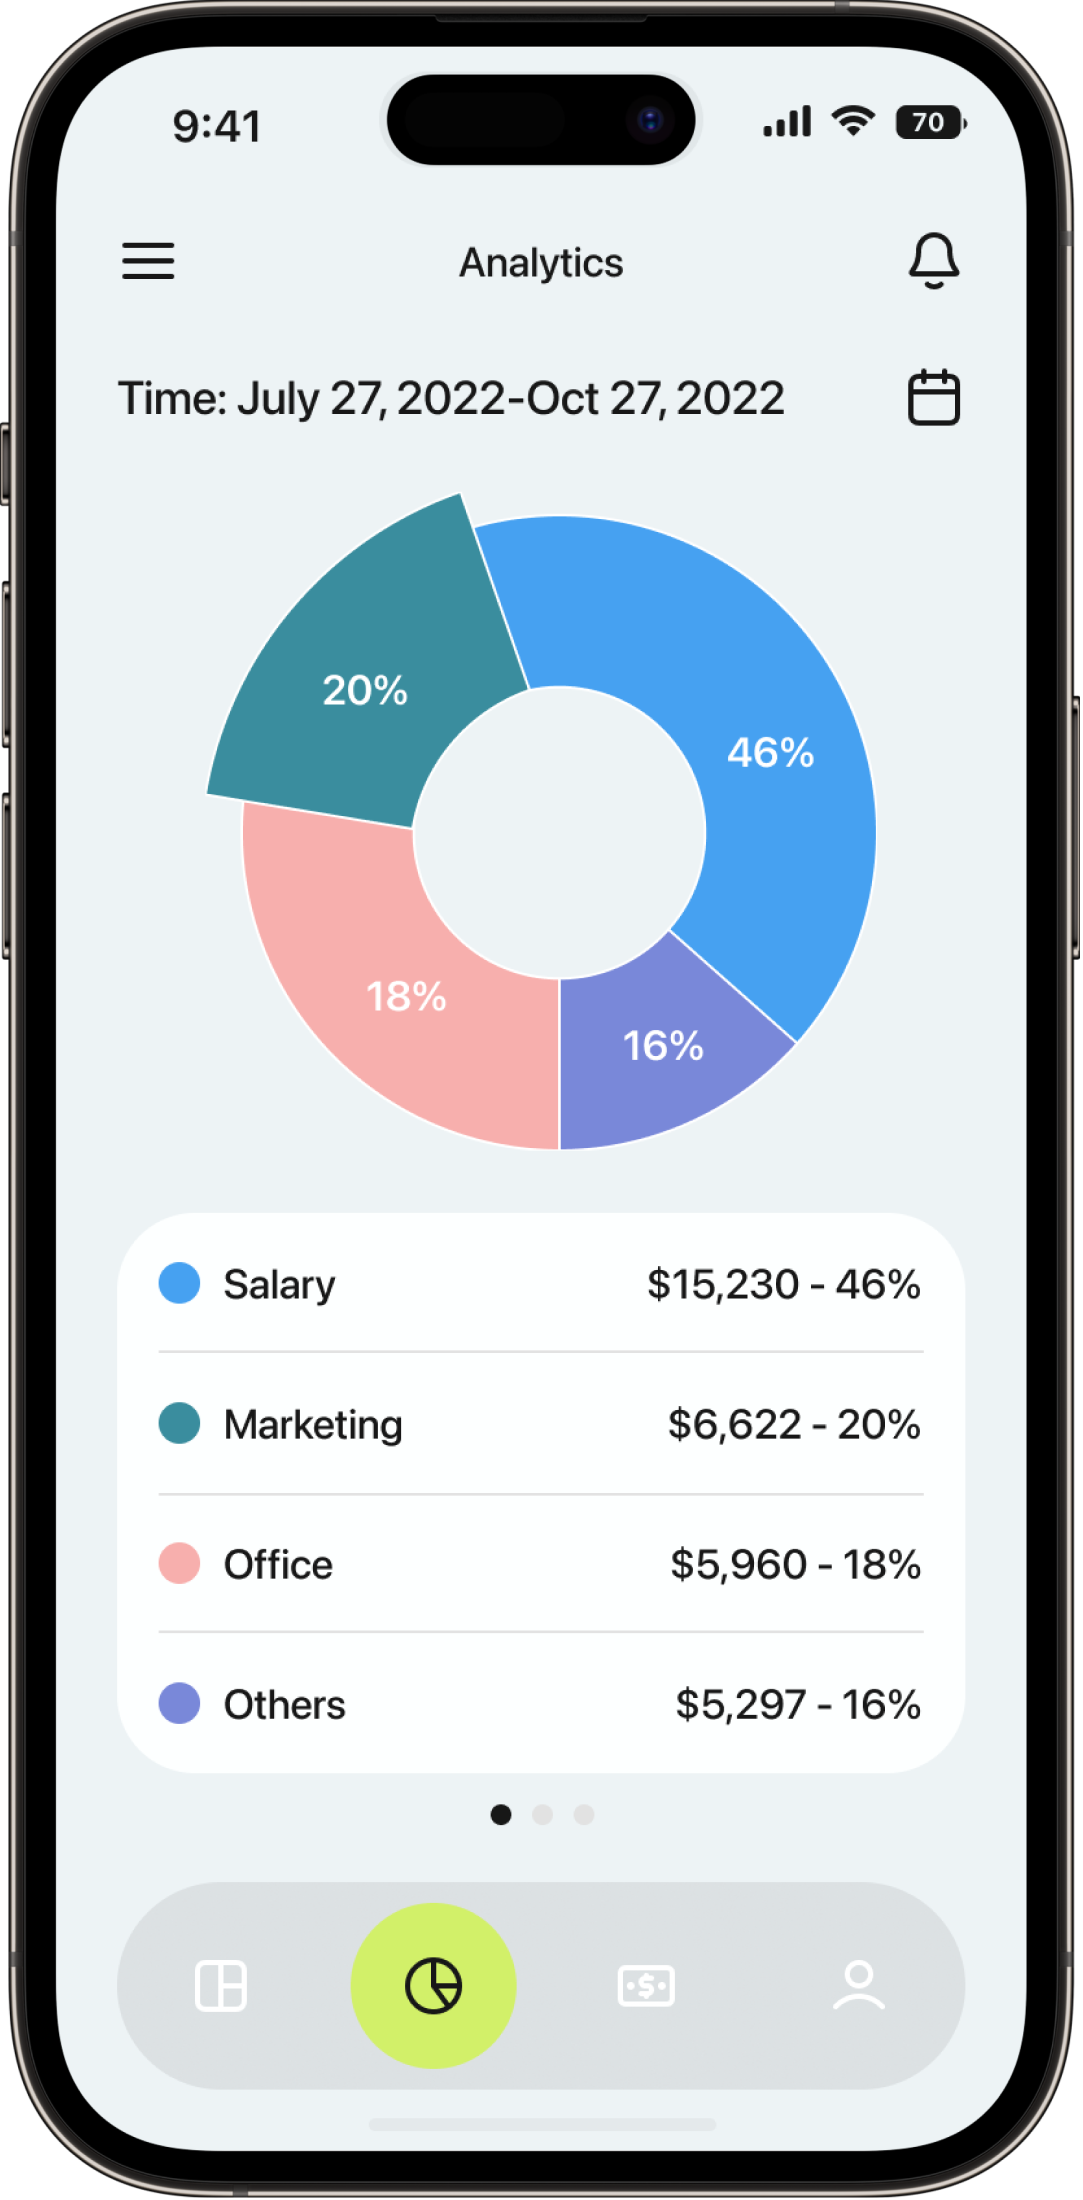 YWS > Works > CaseStudy > Mobile Budgeting  App > Reports and analytics > Image